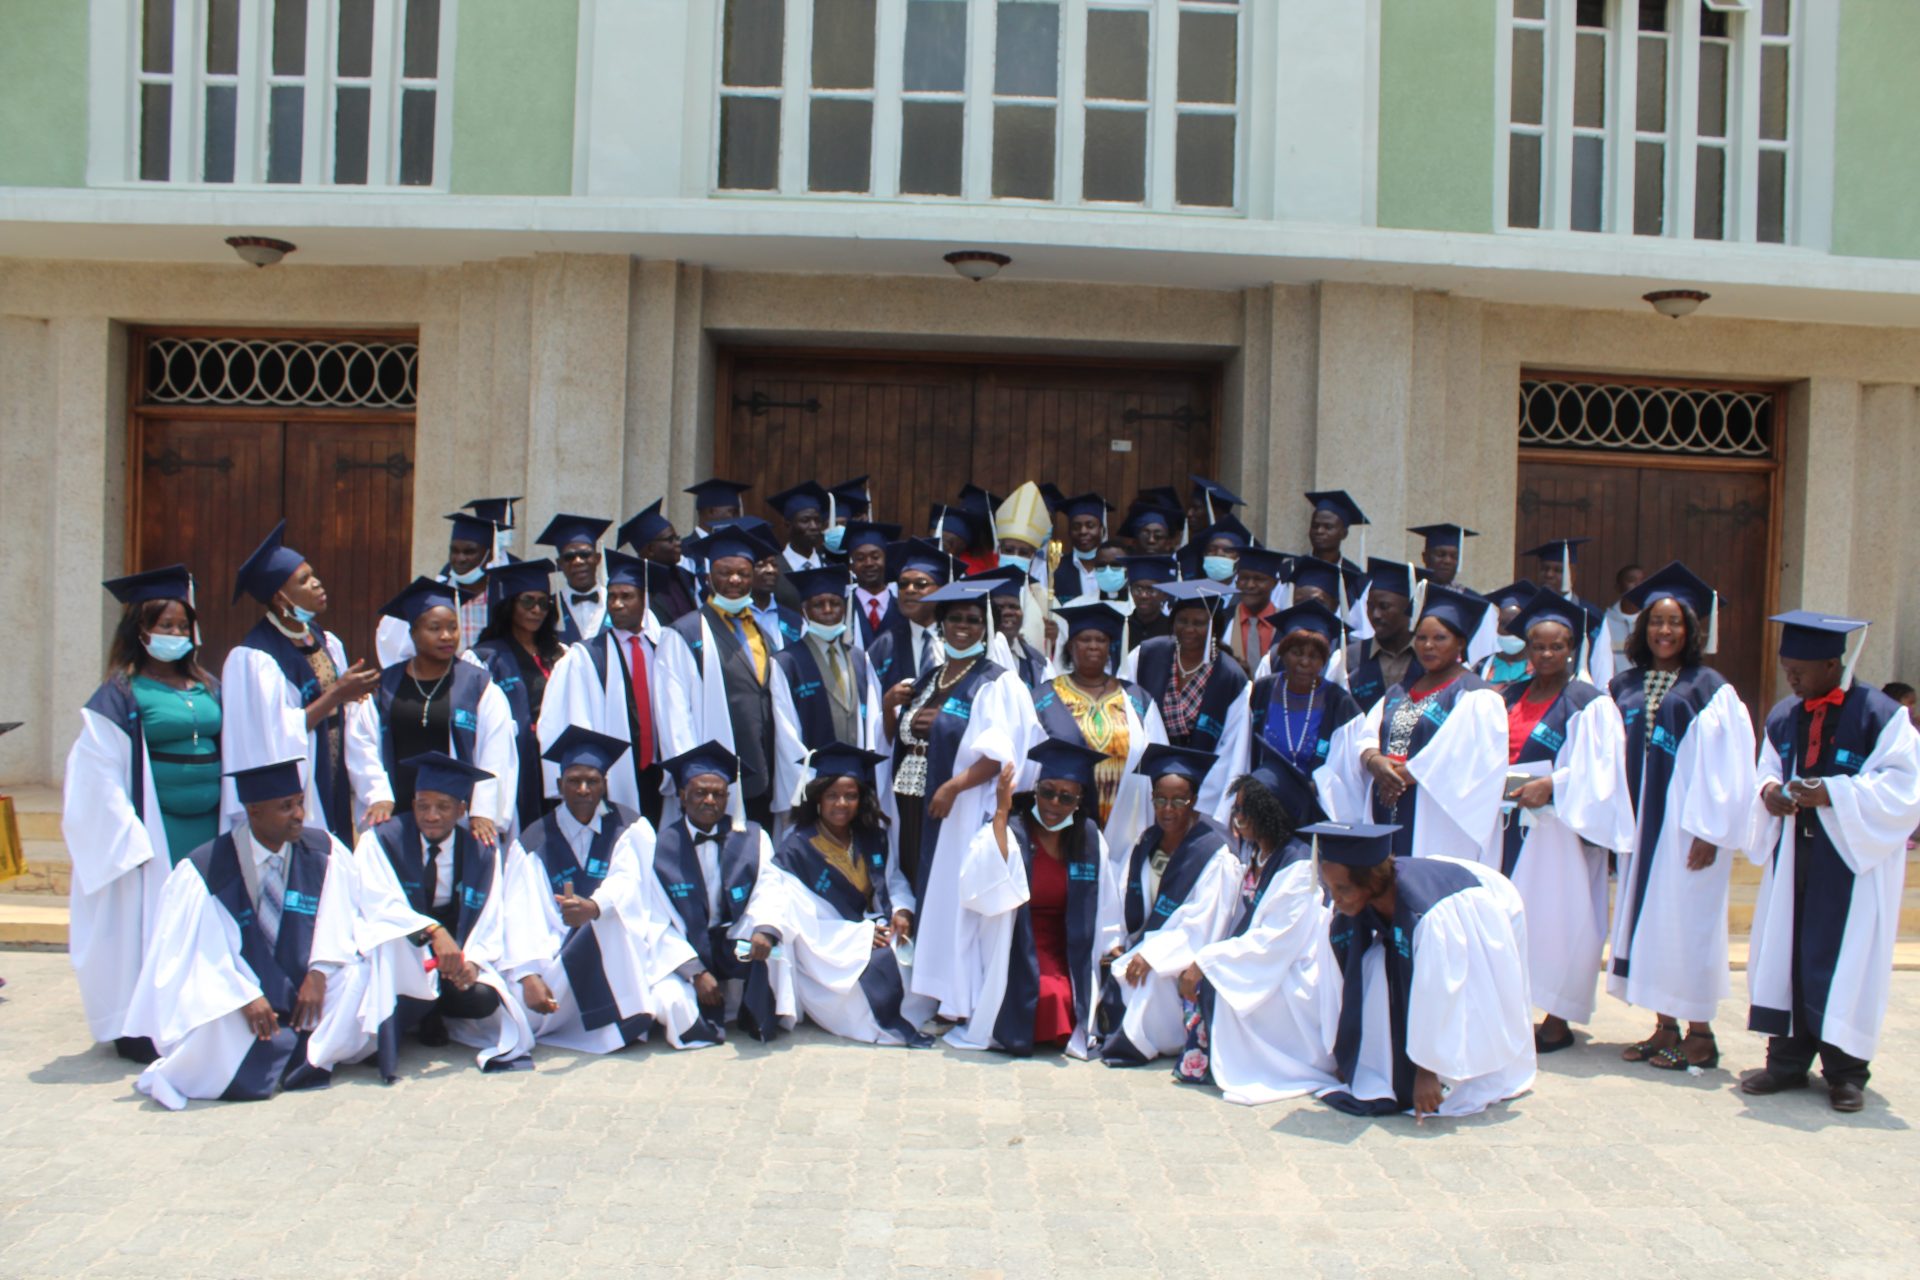 The School of the Faith Graduation- in pictures